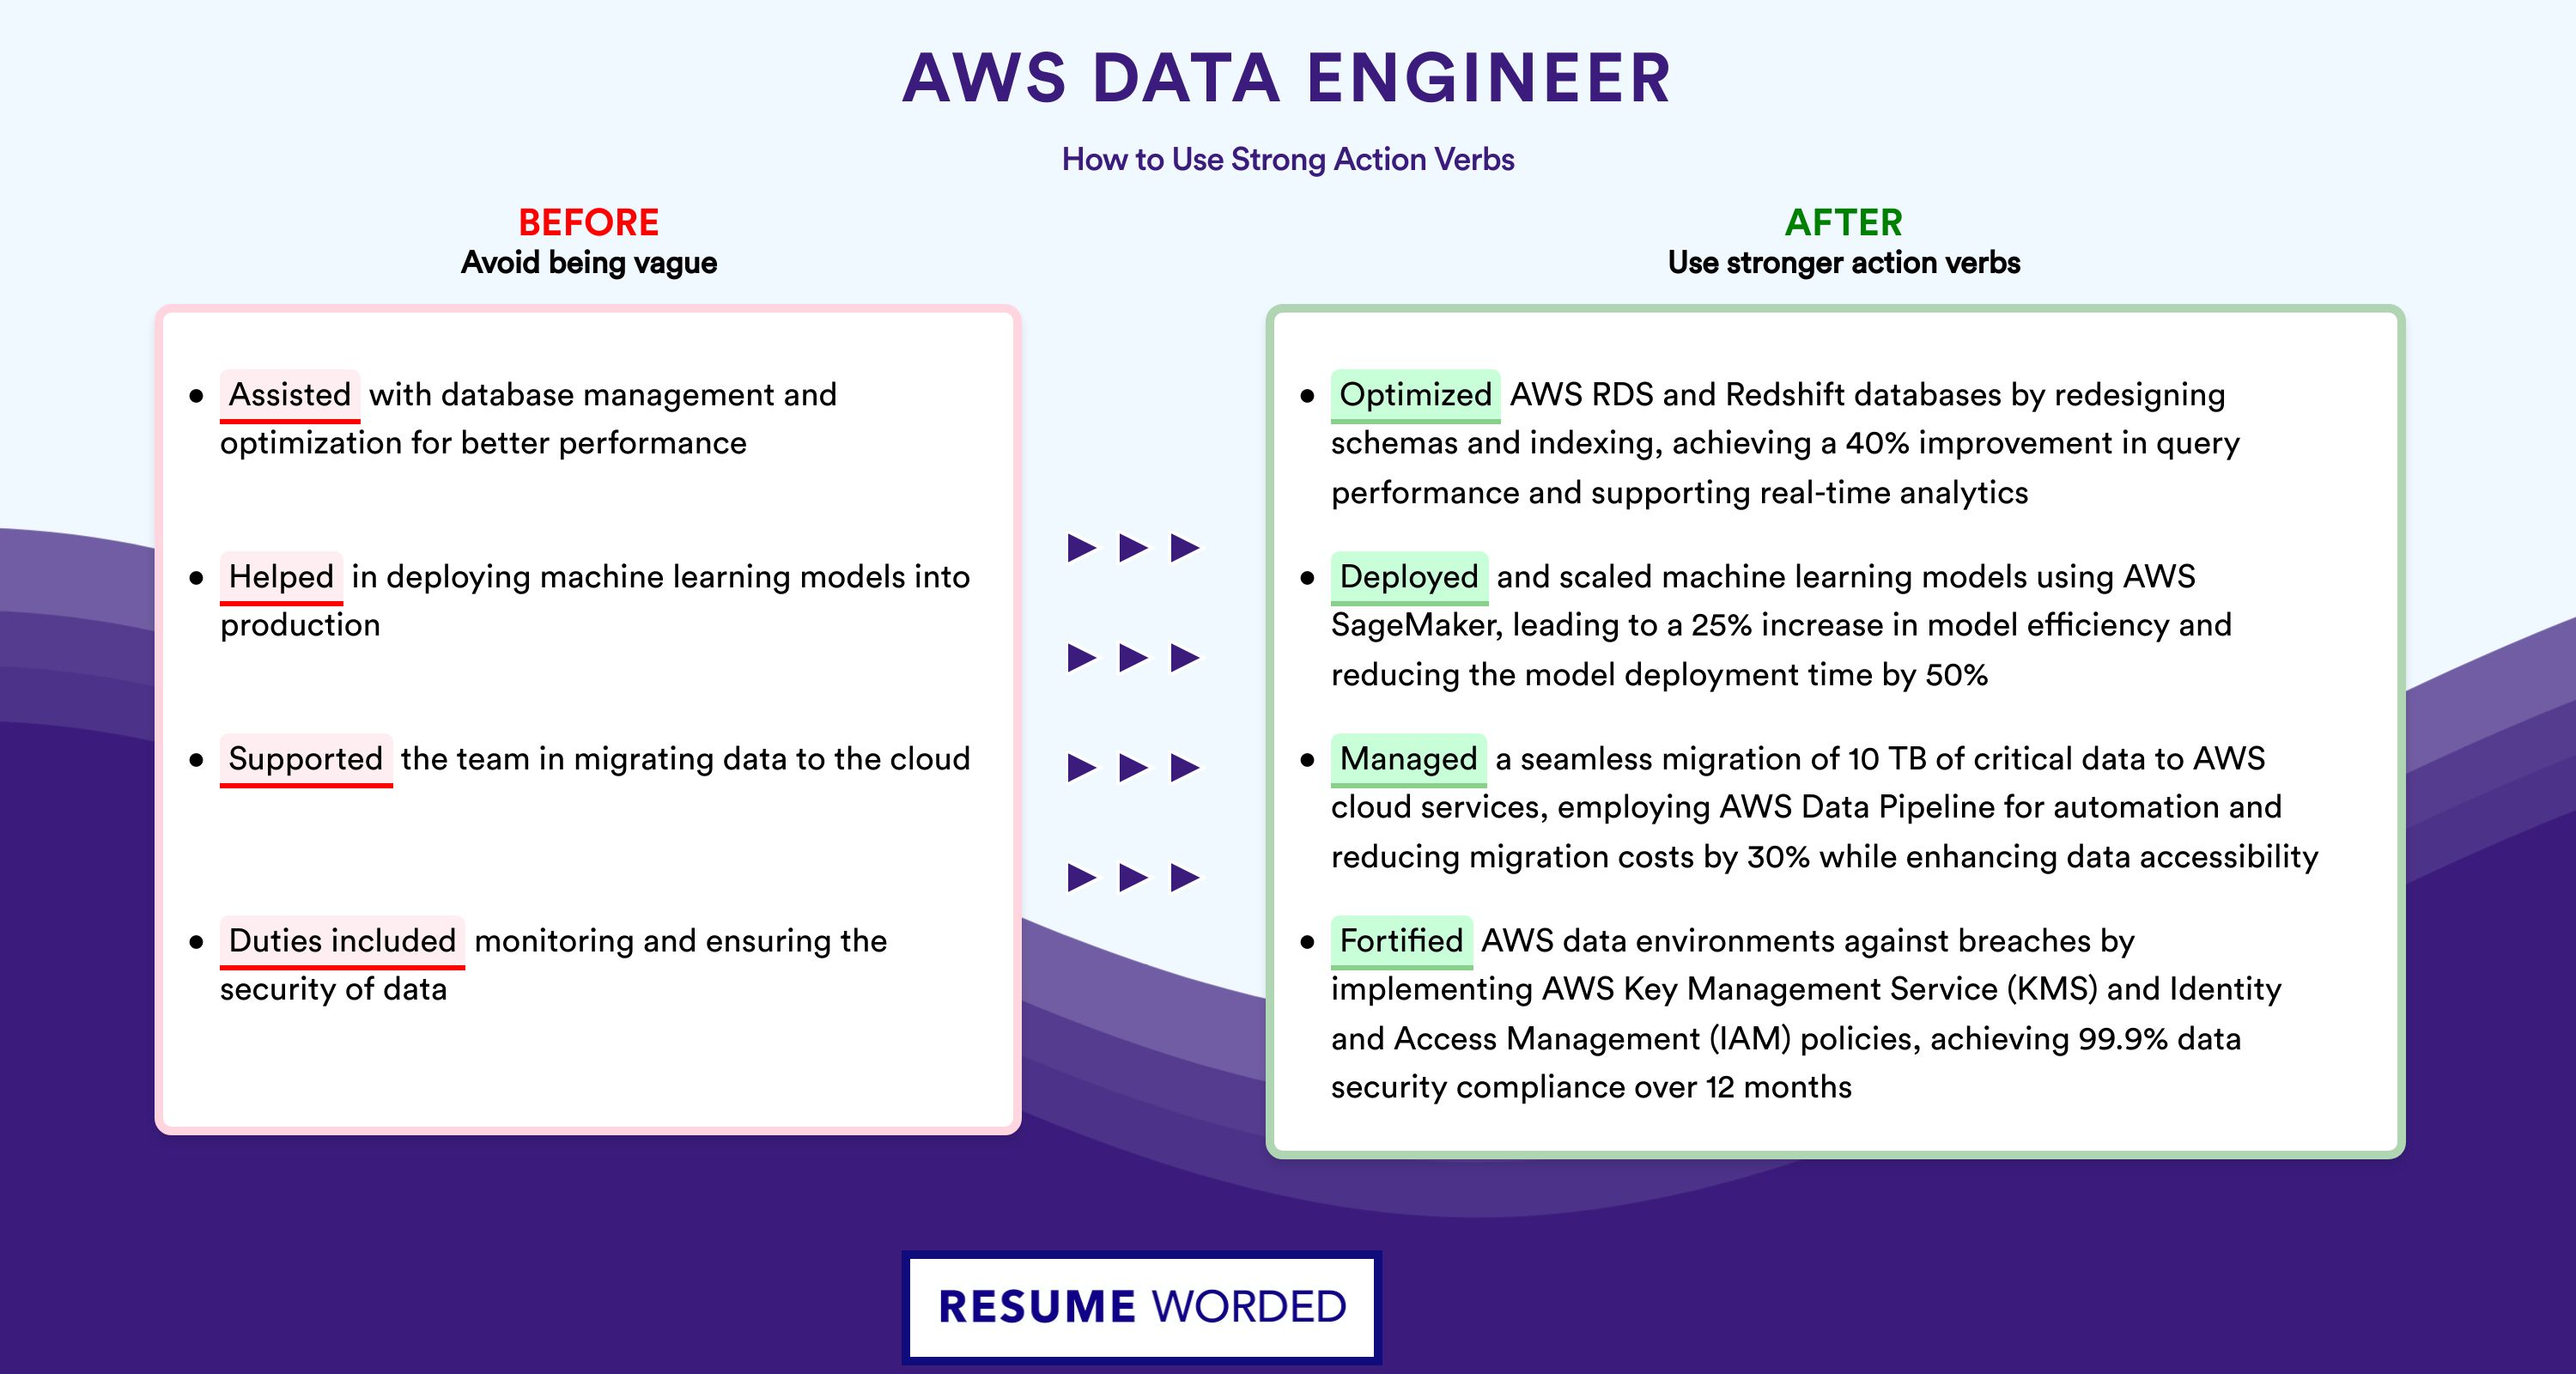 Action Verbs for AWS Data Engineer